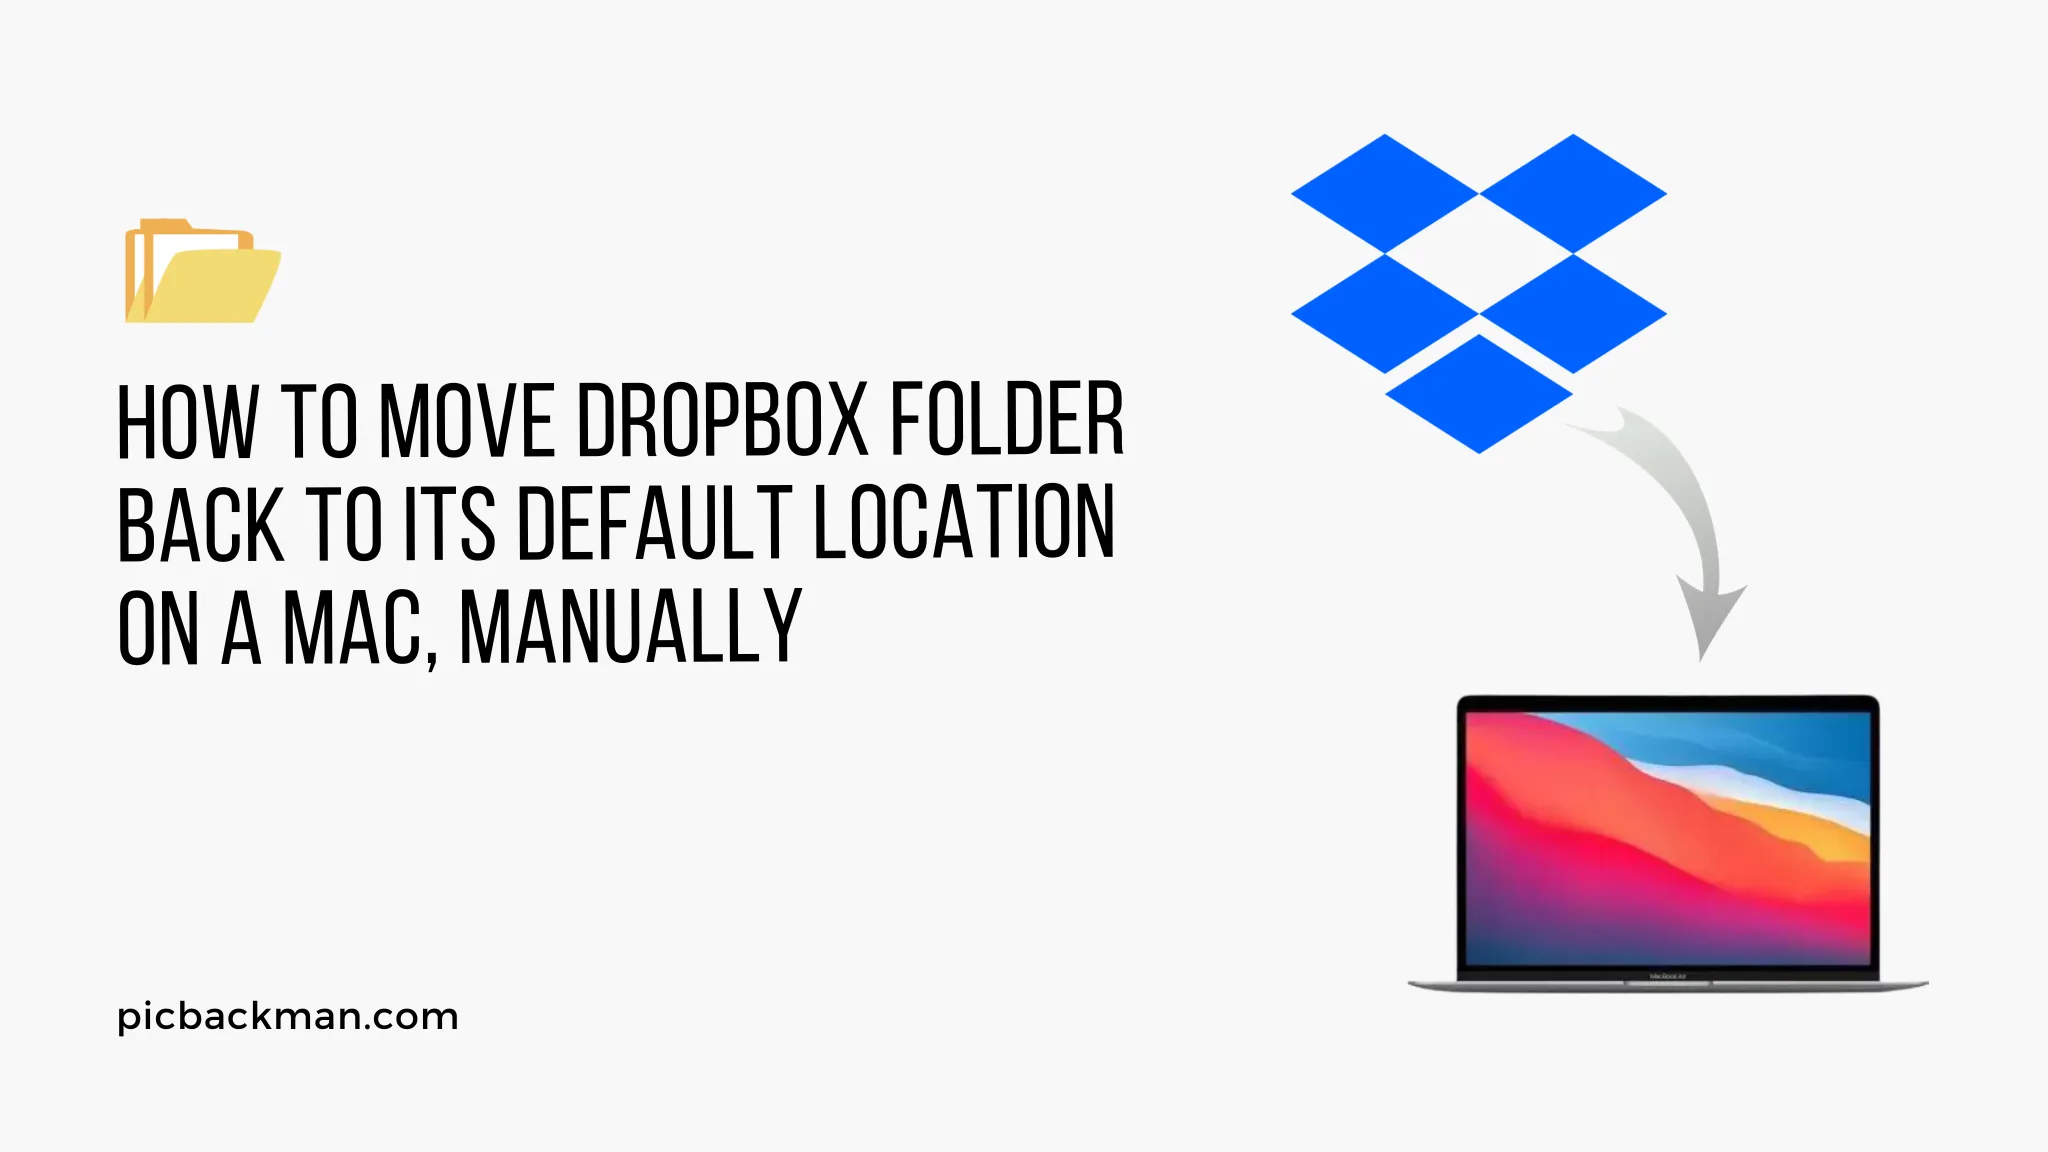 How to move Dropbox folder back to its default location on a Mac, manually